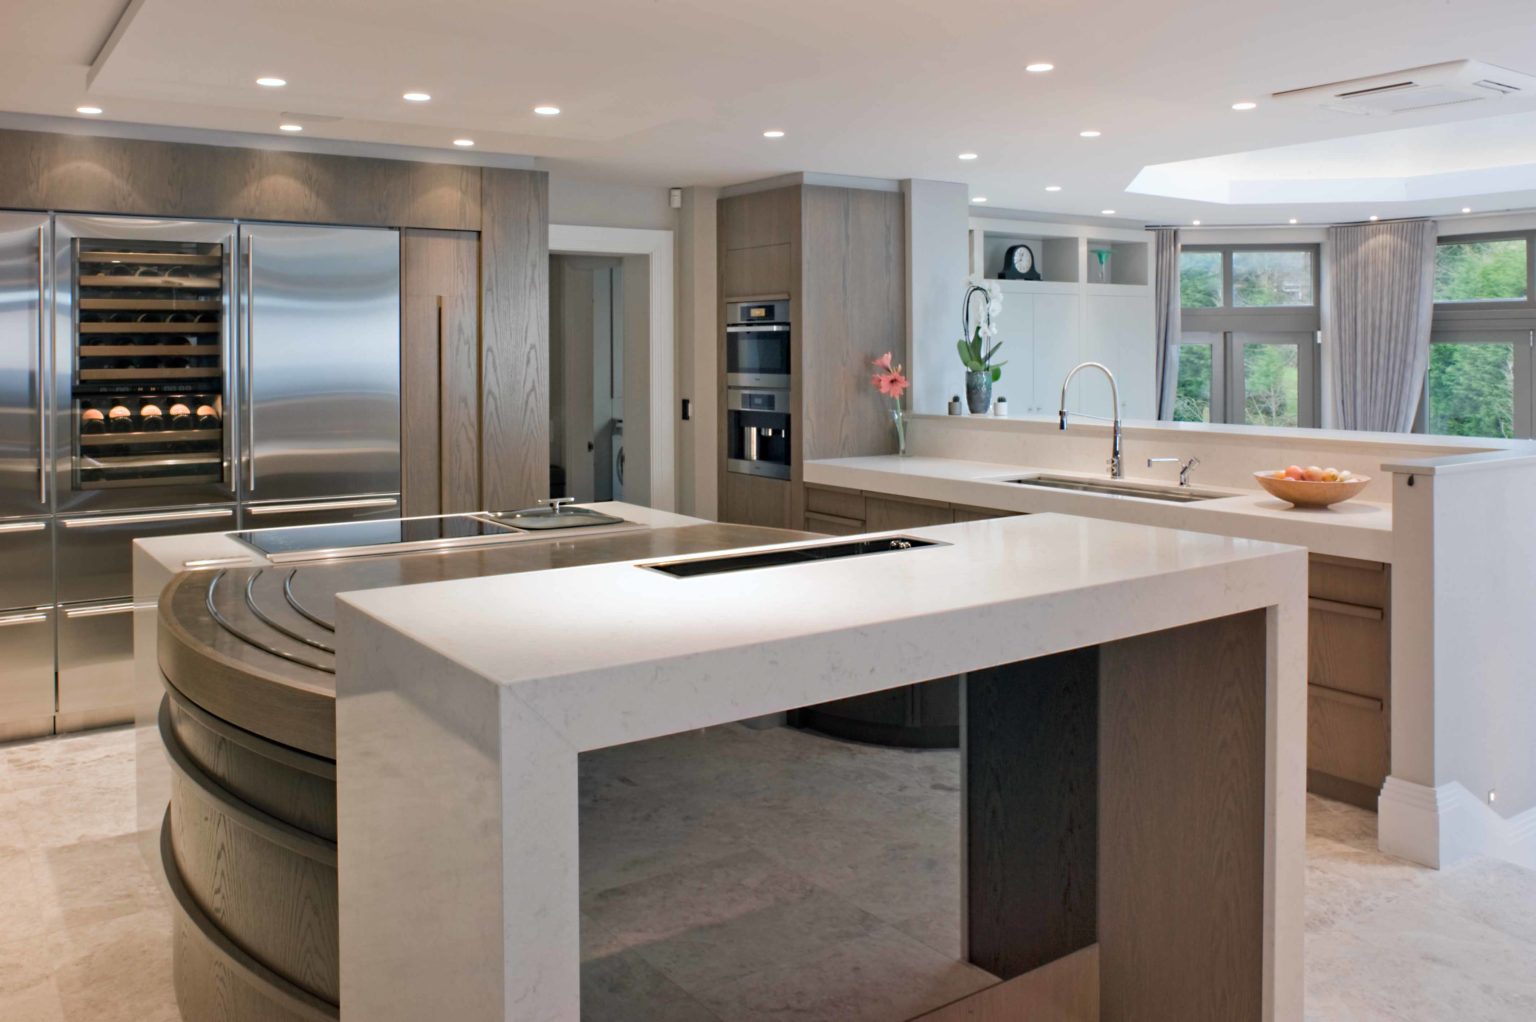 a modern kitchen with a large island in the middle of the room.